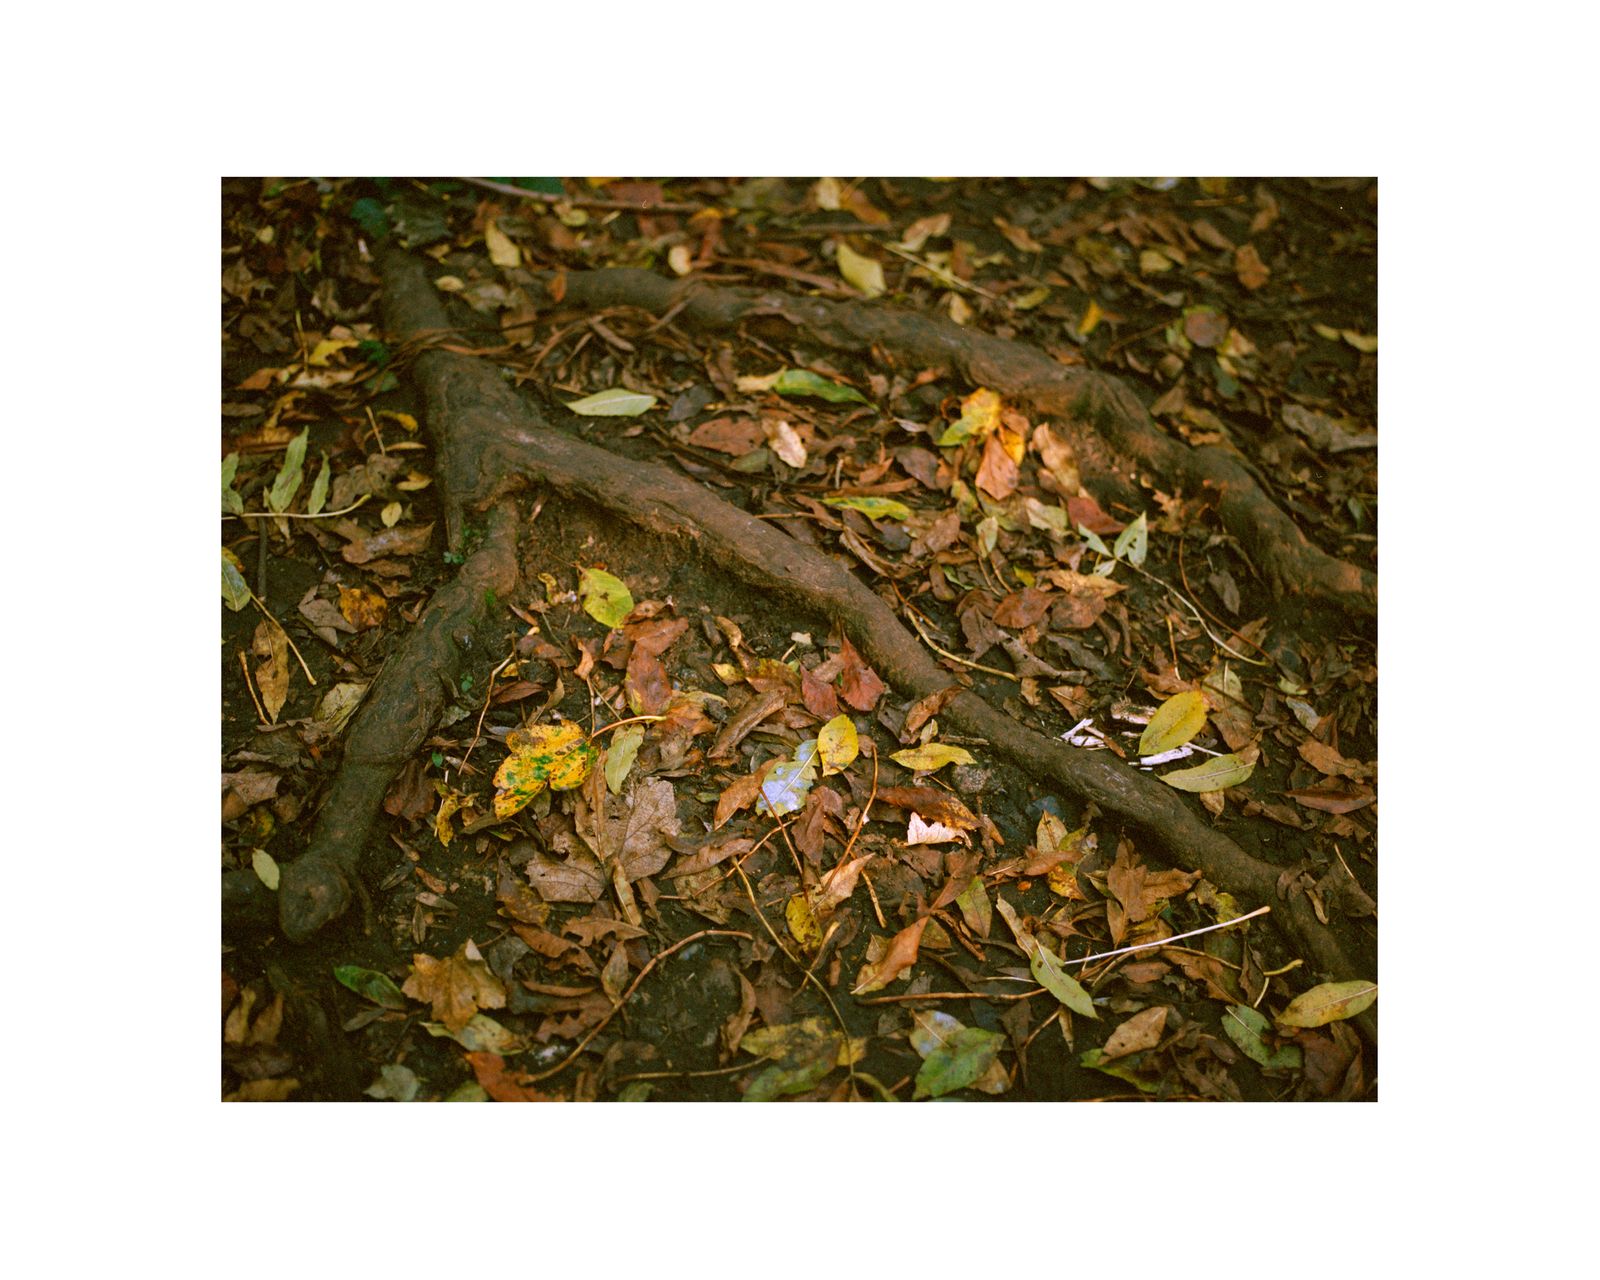 © George Selley - Image from the A Forest is Not a Free Market photography project